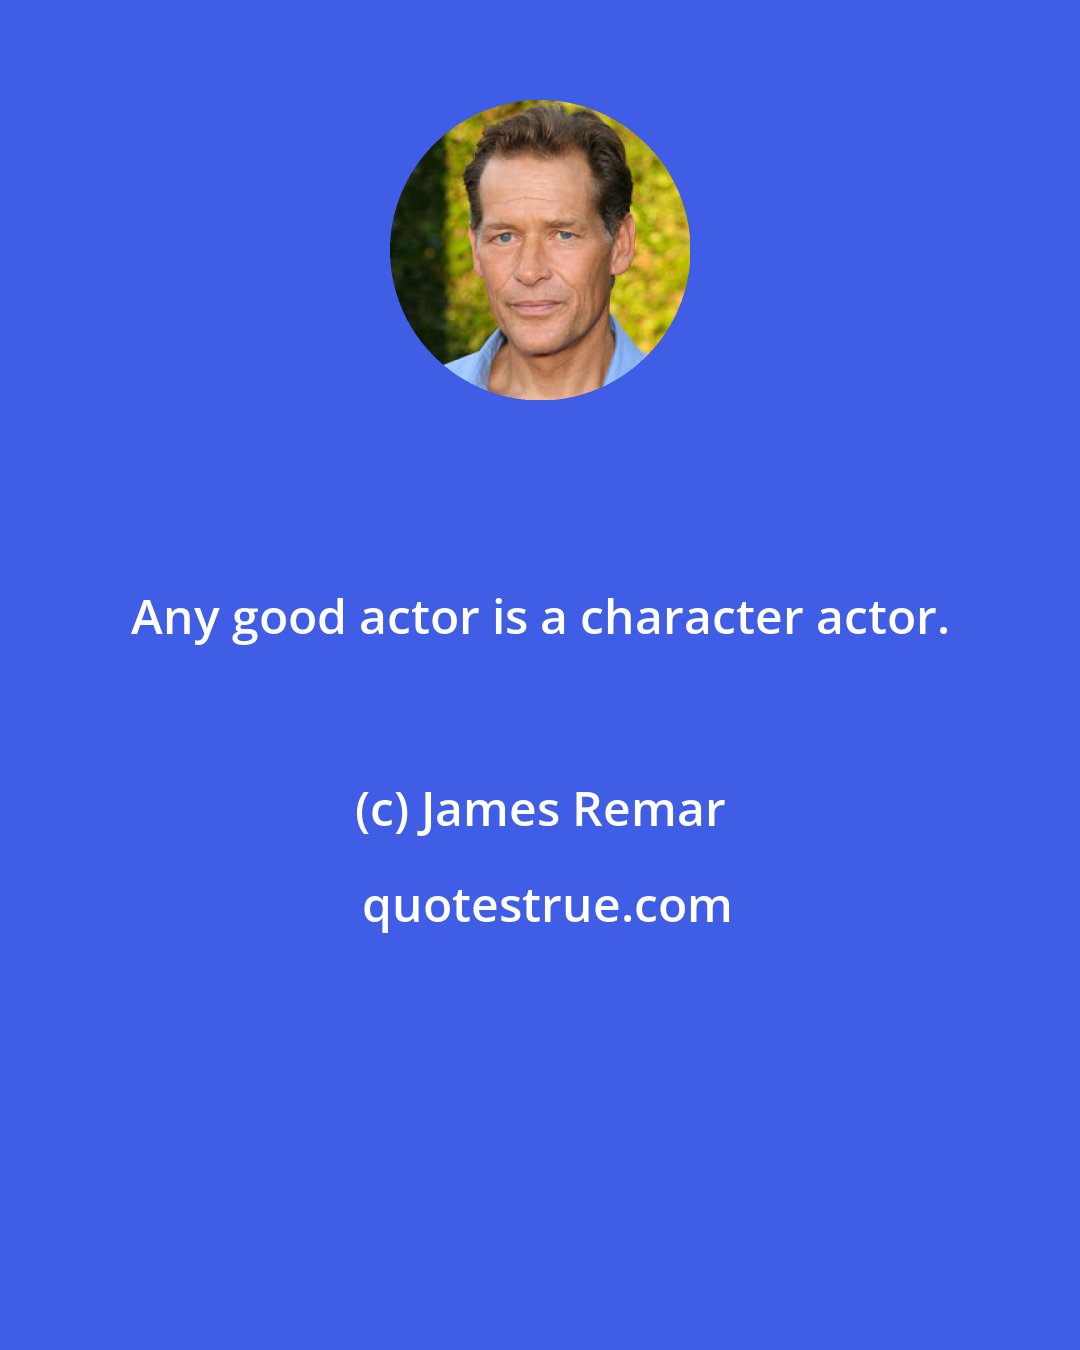 James Remar: Any good actor is a character actor.